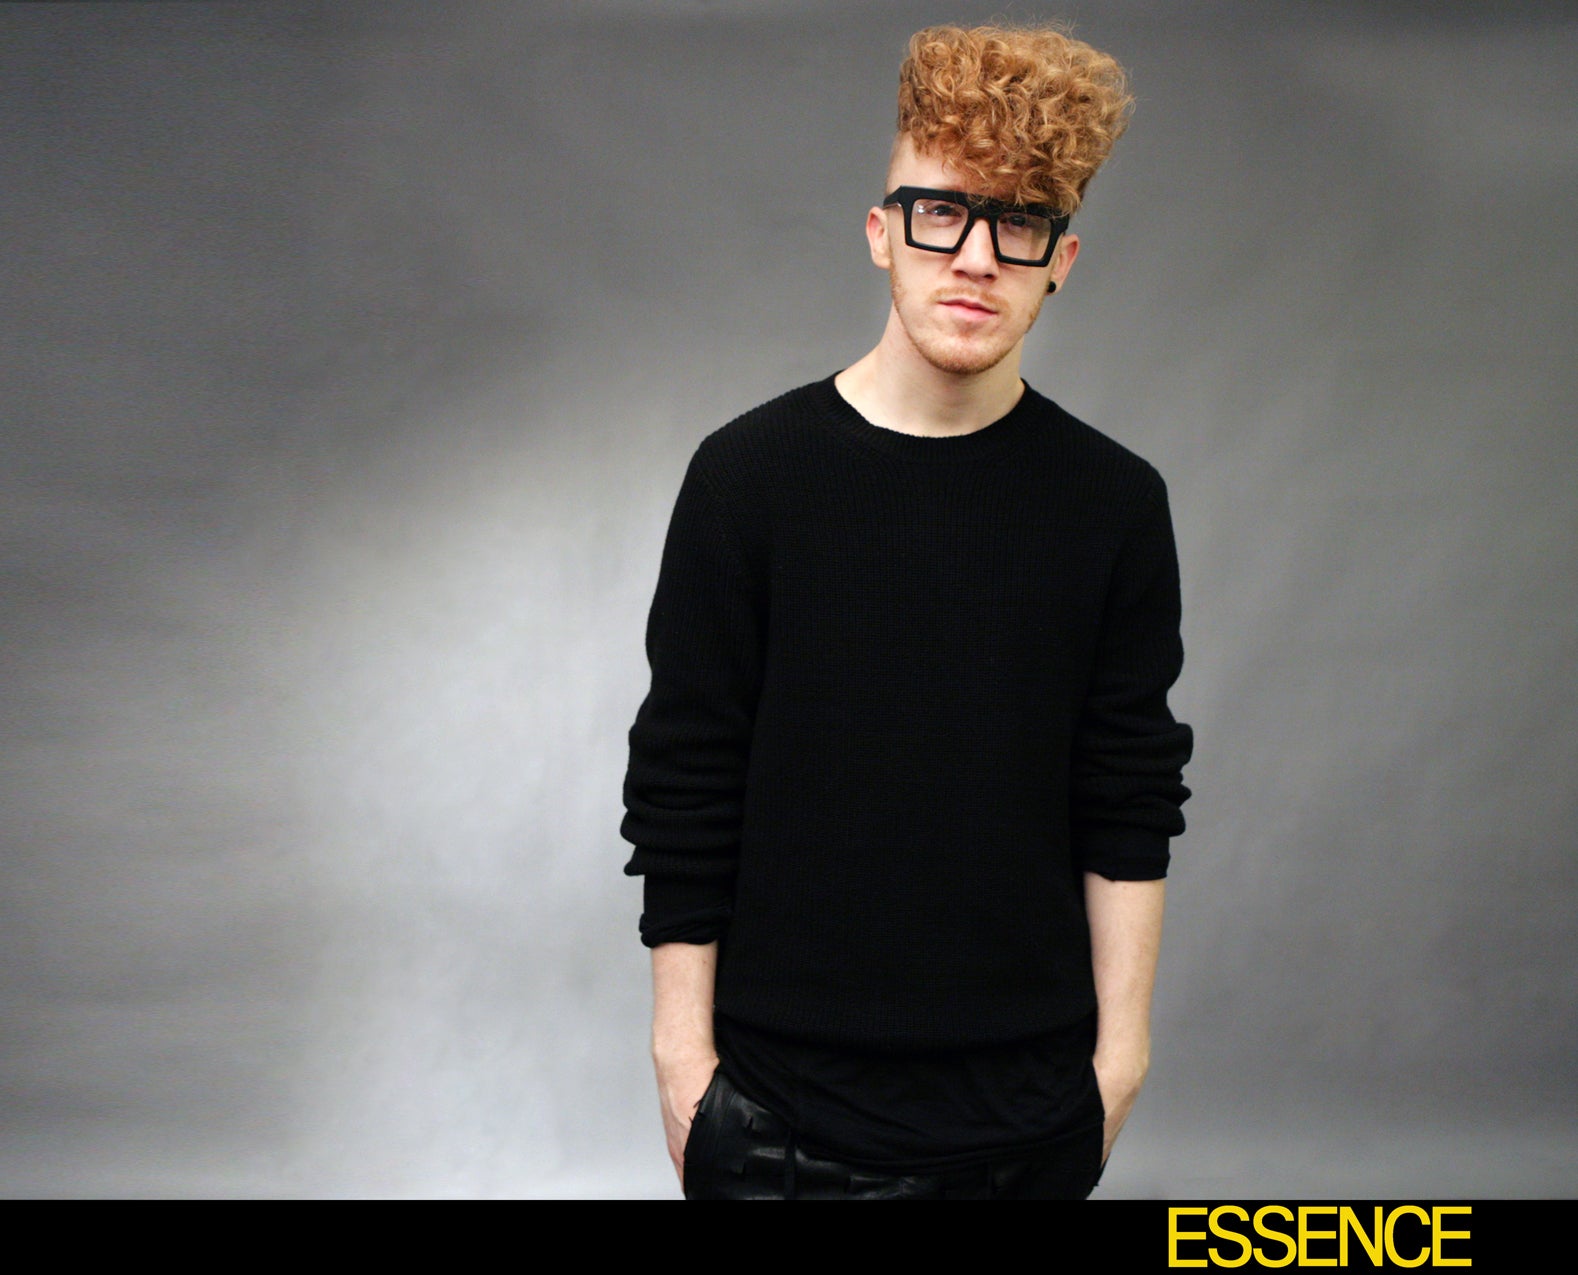 Watch Daley Perform 'Alone Together' for ESSENCE